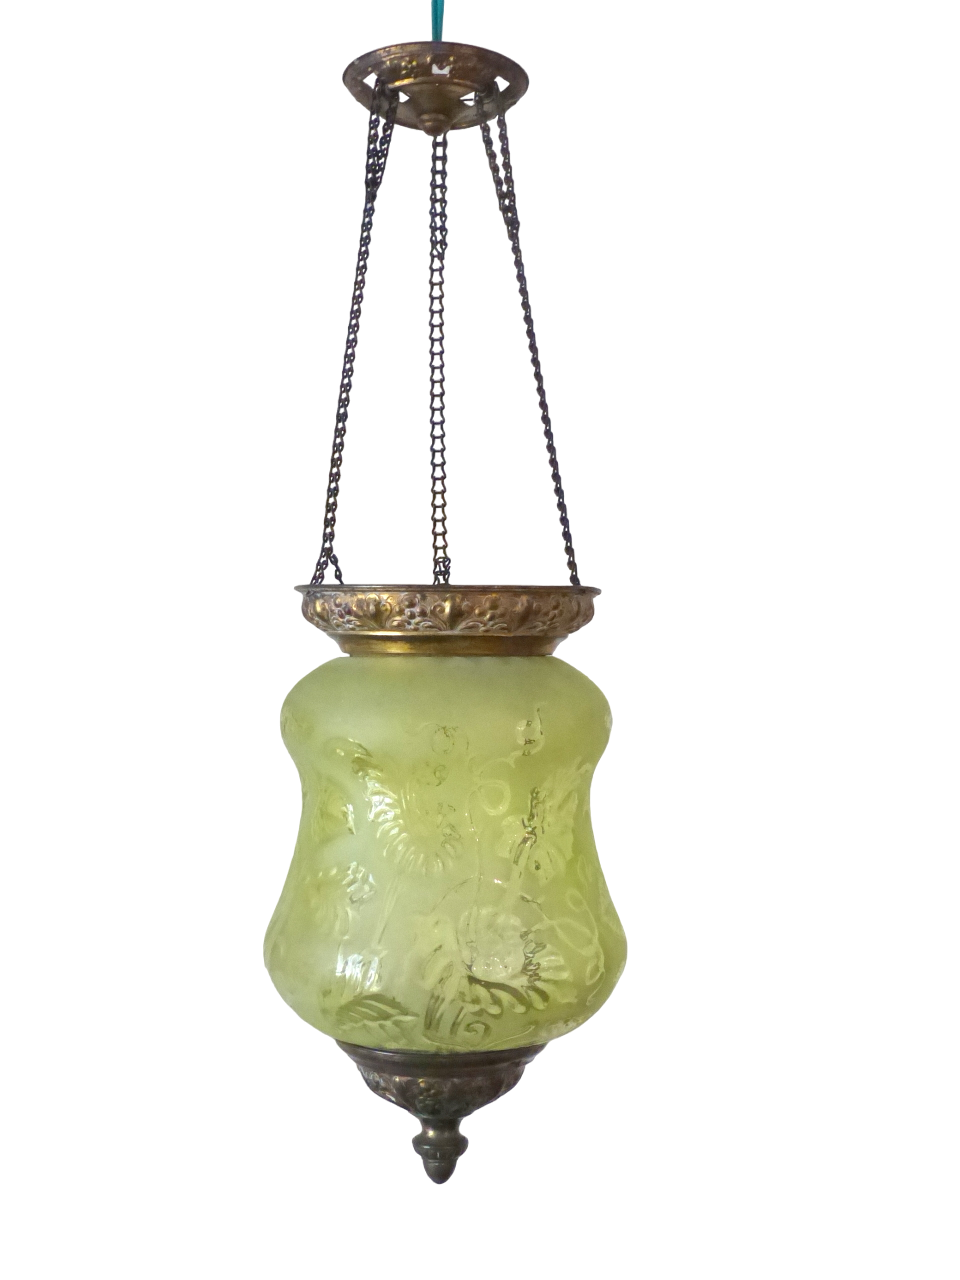 Gorgeous French Lantern Baccarat Style 1900 Brass Chandelier Ceiling Green Glass